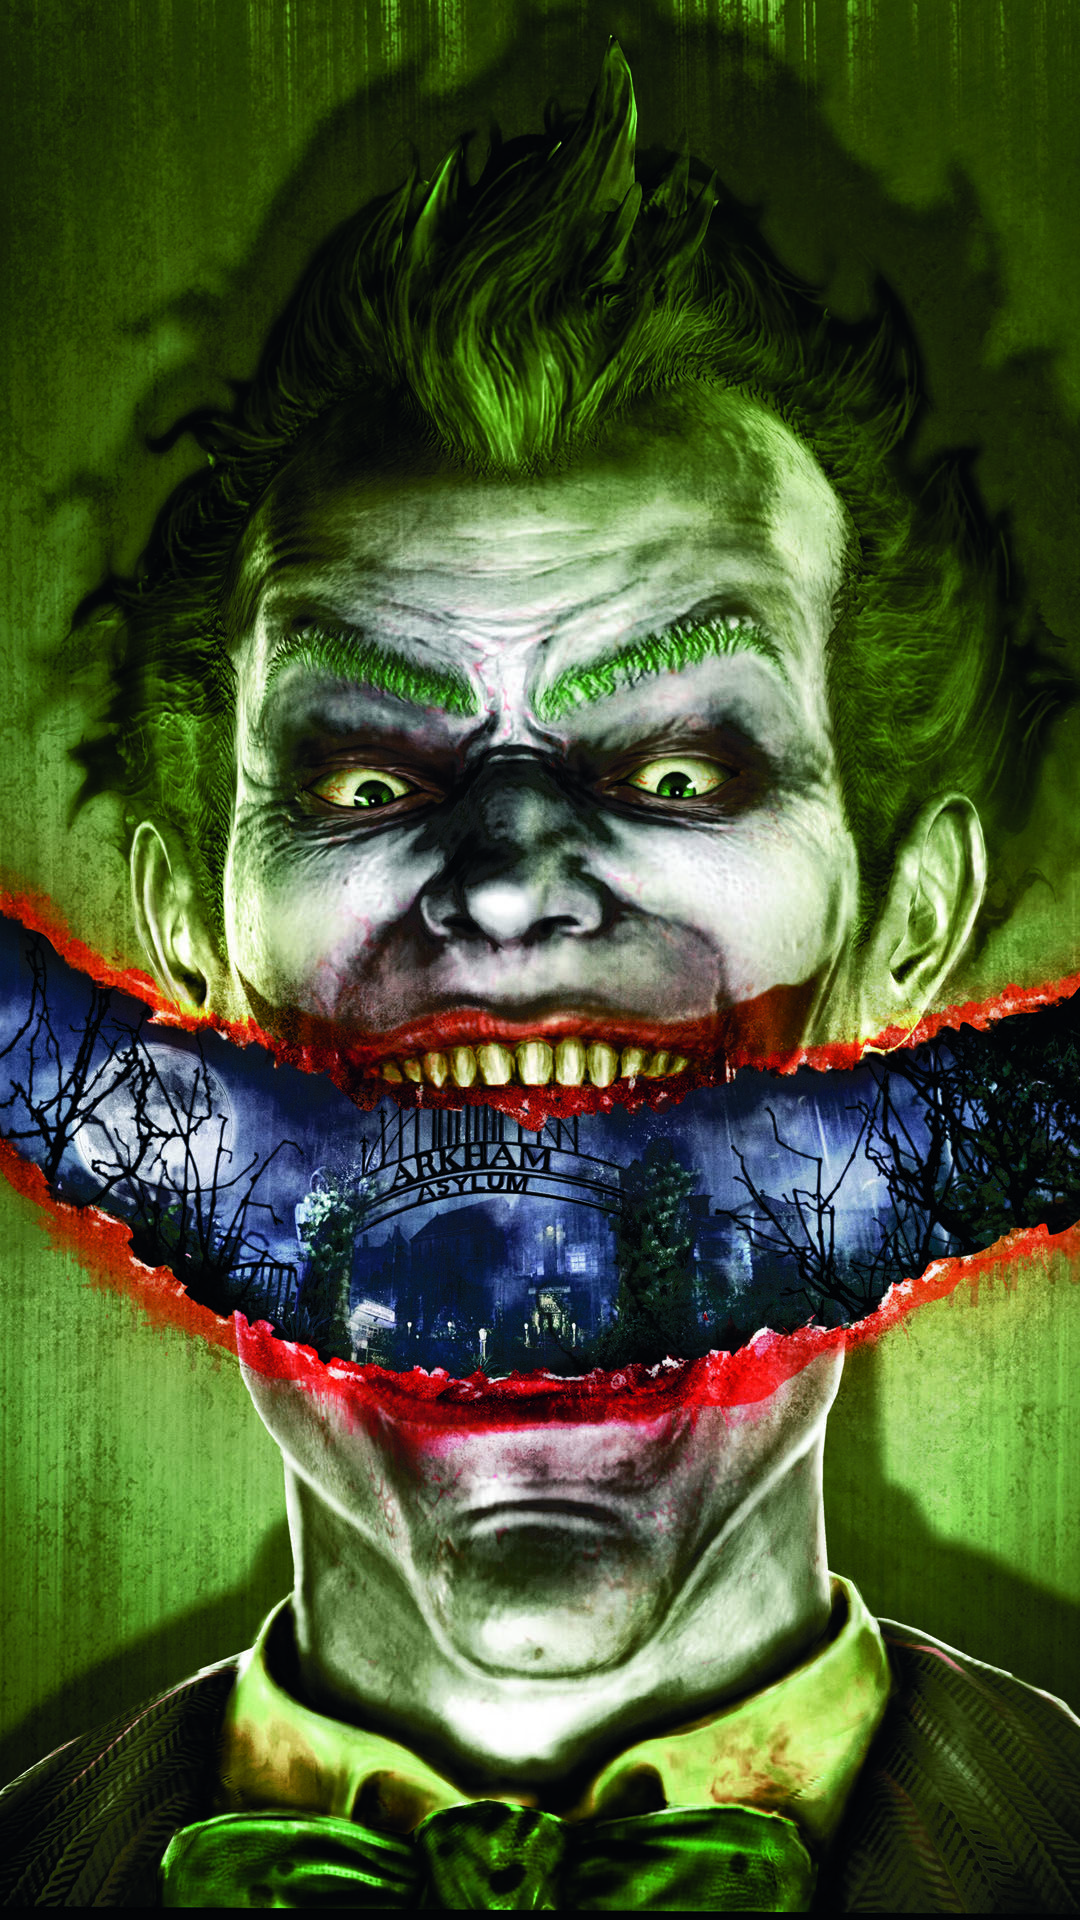 Joker smile htc one wallpaper, free and easy to download